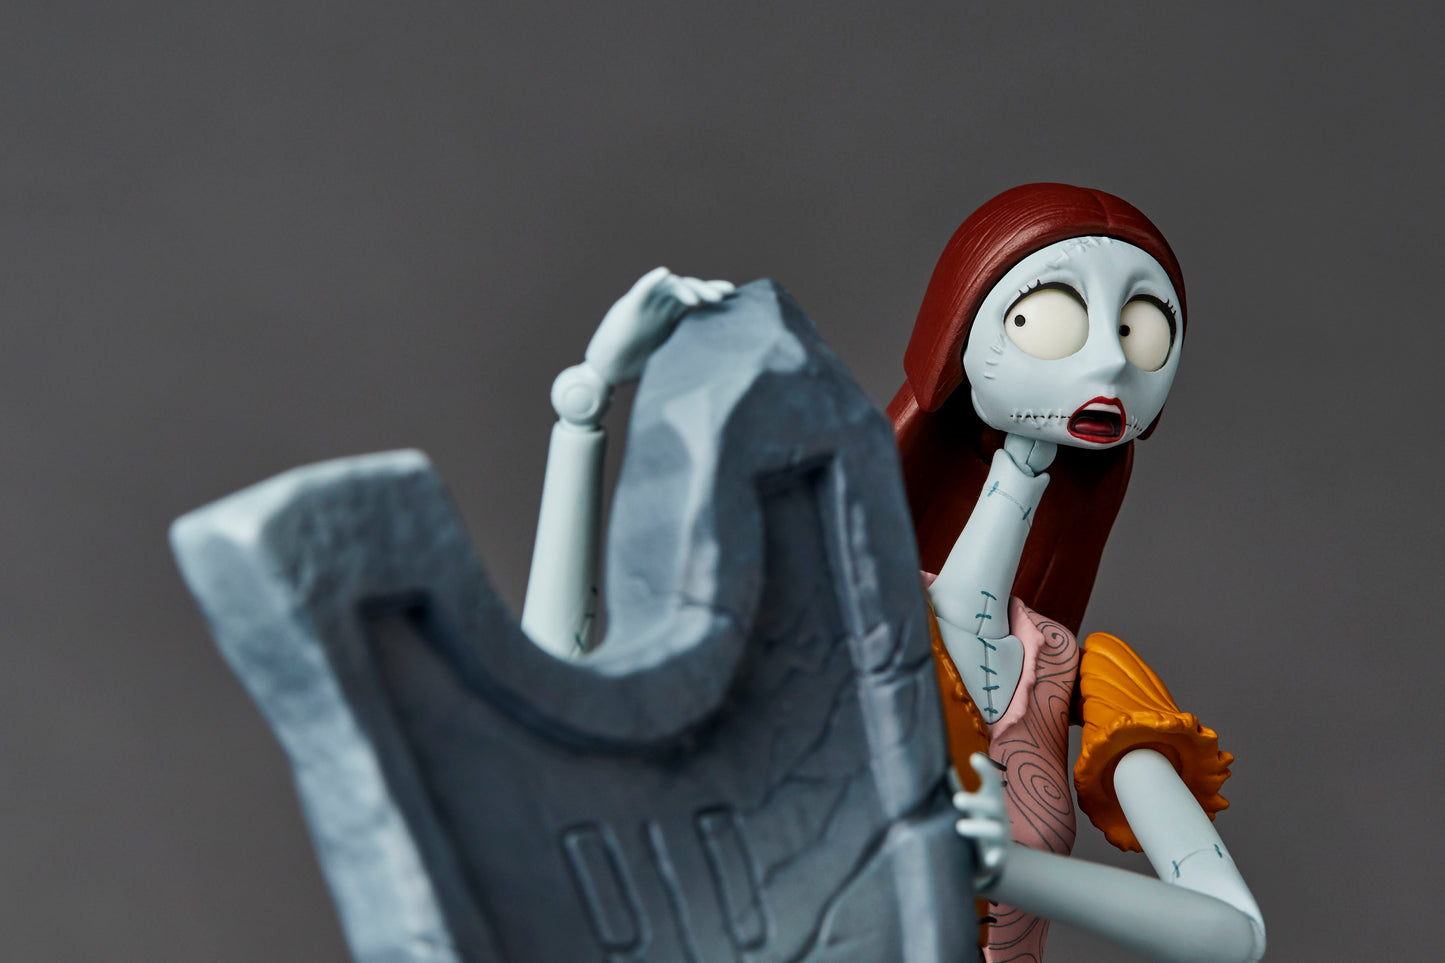 Revoltech "The Nightmare Before Christmas" Sally